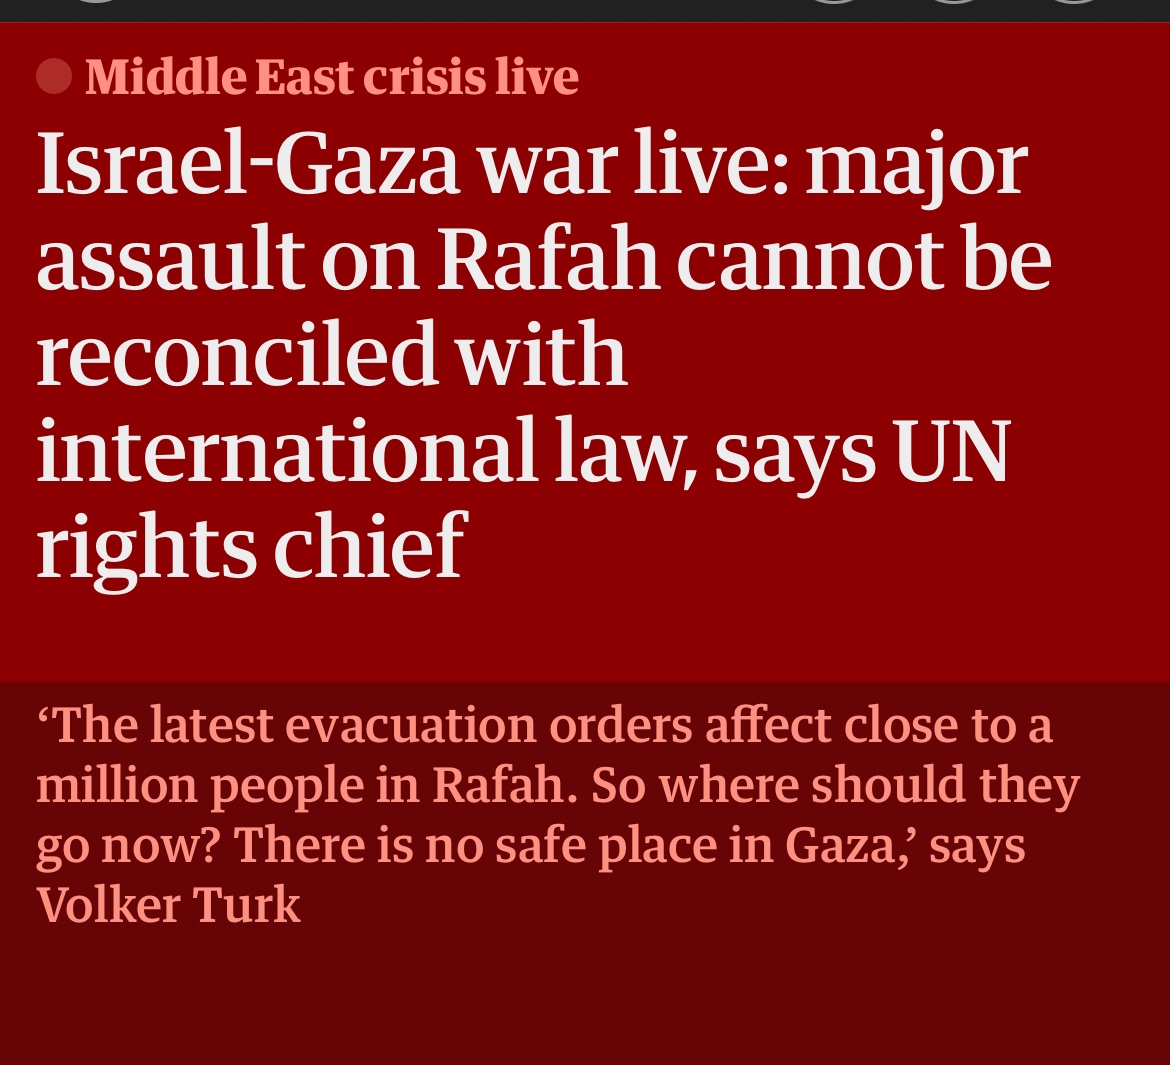 Which begs the question: why is the govt still selling weapons to Israel? Let me answer: It is in part because the concept of ‘universal human rights’ & ‘rule of law’ only ever applied to some If you’re Gazan, Iraqi, poor or the global south generally - you’re prob not included